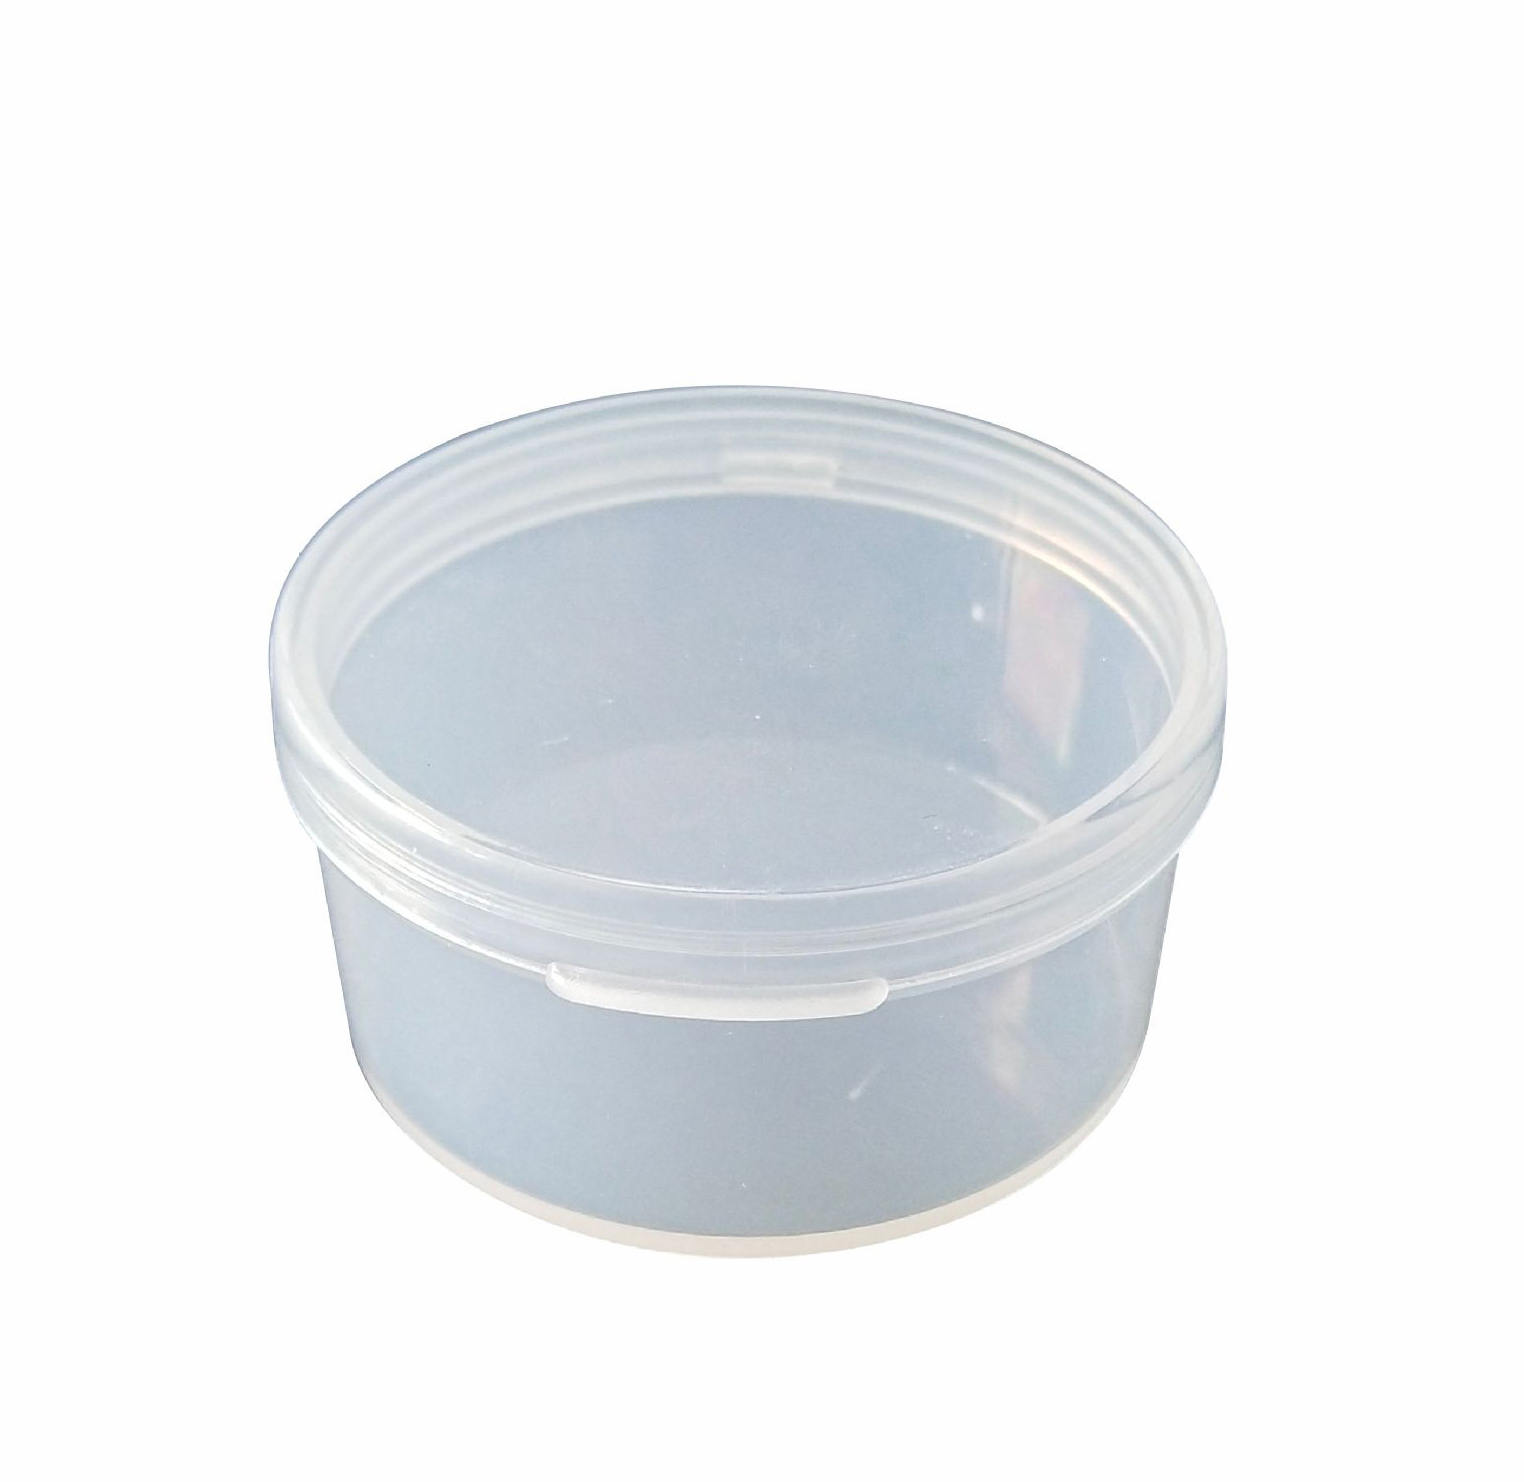 https://www.gabrow.com/wp-content/uploads/2022/06/Round-Clear-Plastic-Box-Case-with-Flip-Up-Lids-for-Cosmetic-Items-0.jpg